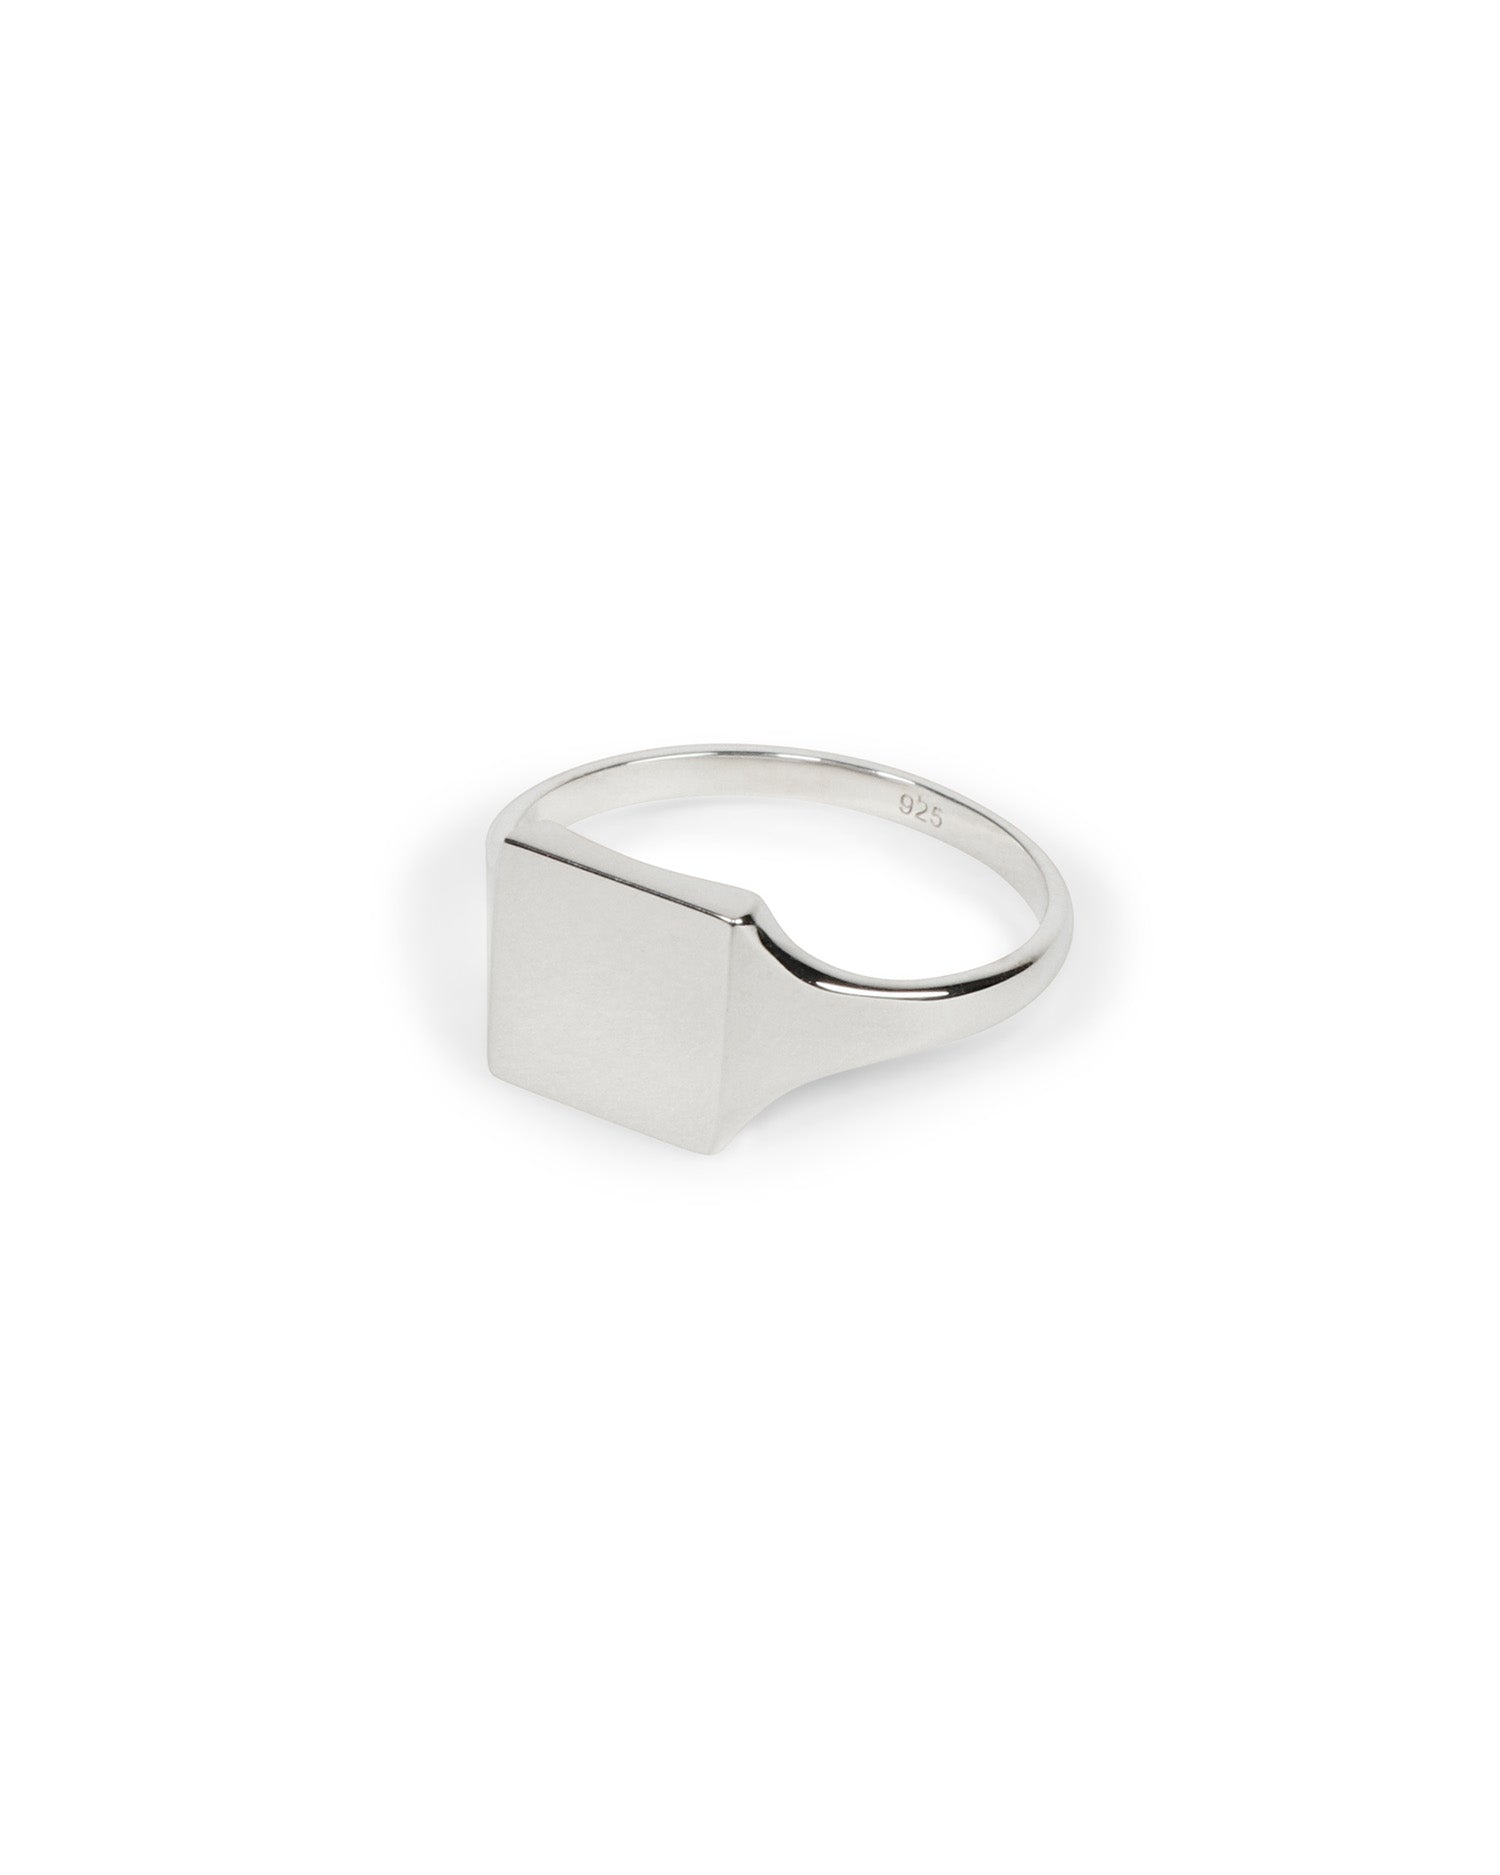 TYPE 011 Slim Square Signet Ring - 925 Sterling Silver